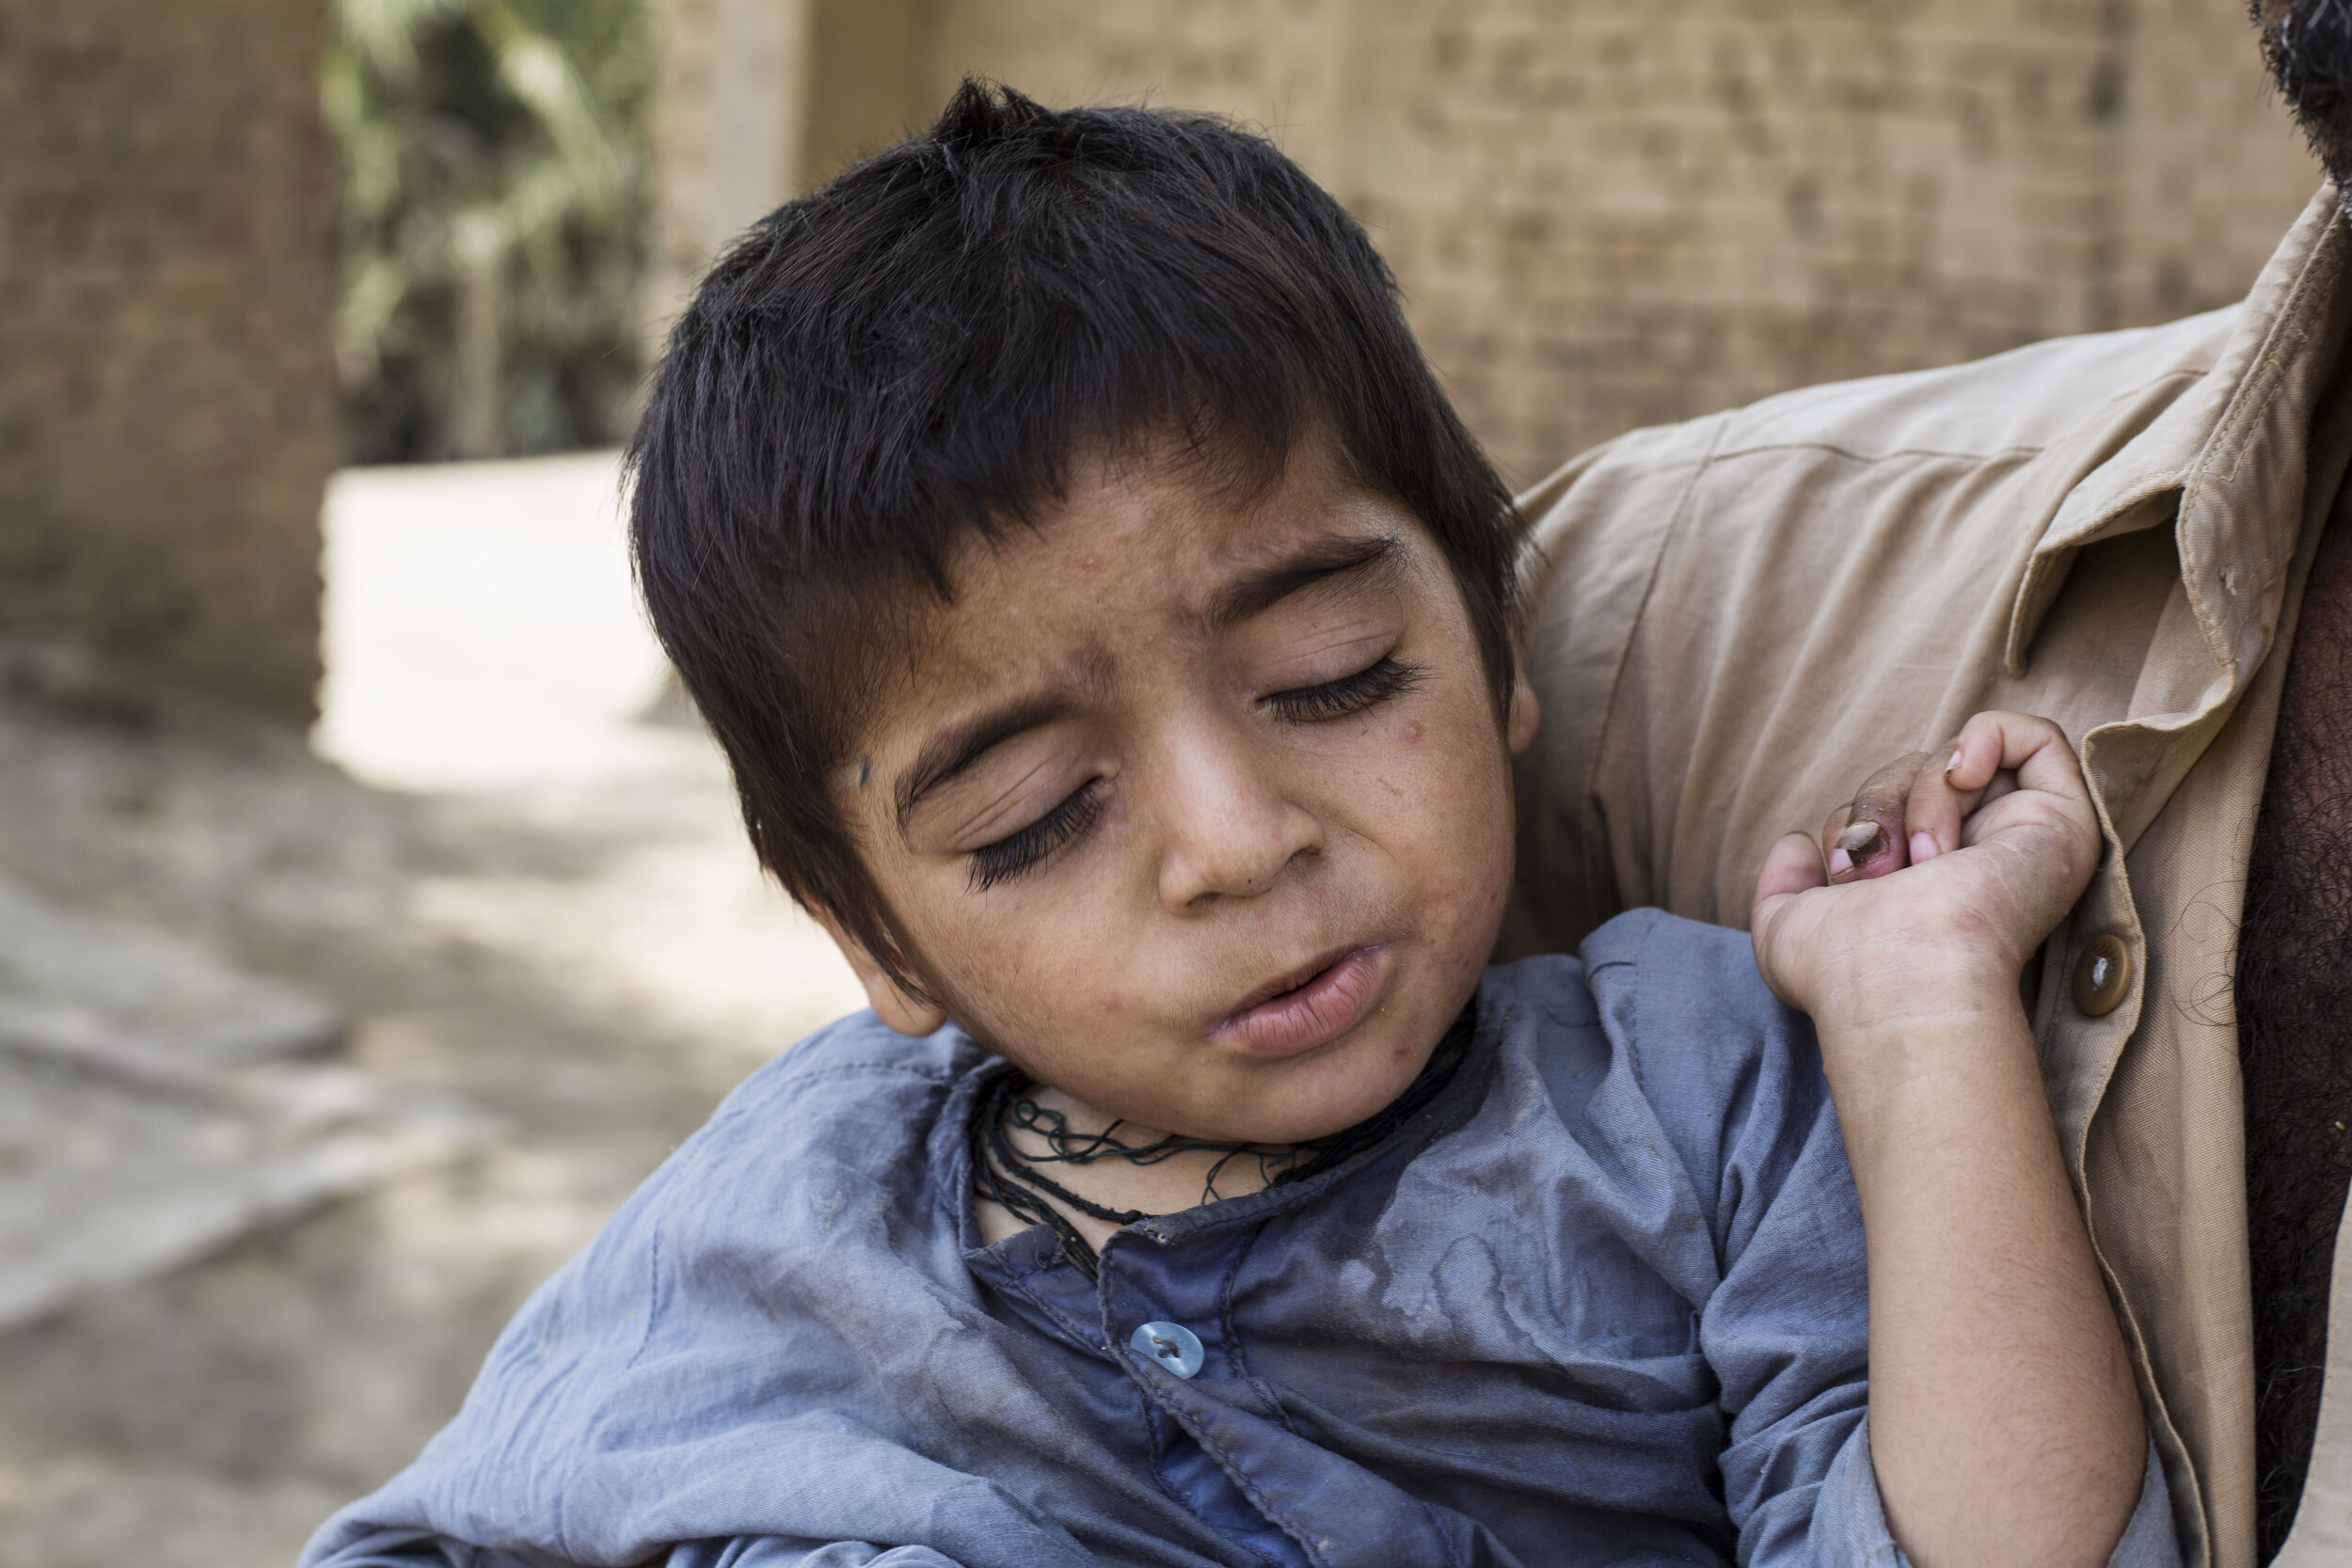  3-year-old Muhammad Ilyas has been diagnosed with HIV  on July 24, 2019 in village Thango Bozdar, Sind, Pakistan. 